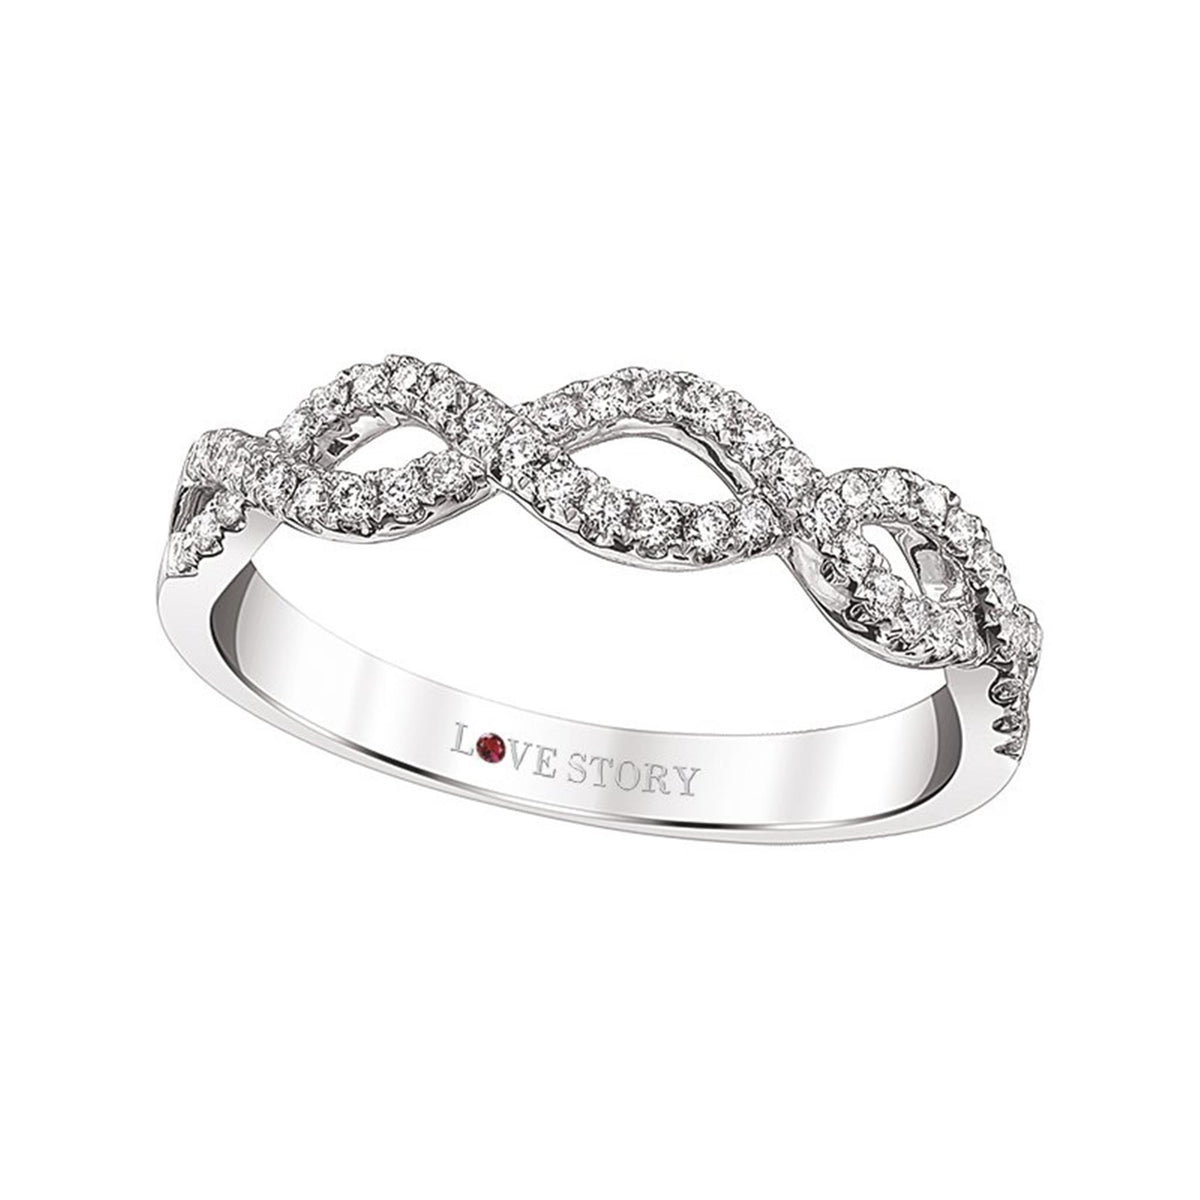 14Kt White Gold Infinity Weave Ring With 0.27cttw Natural Diamonds